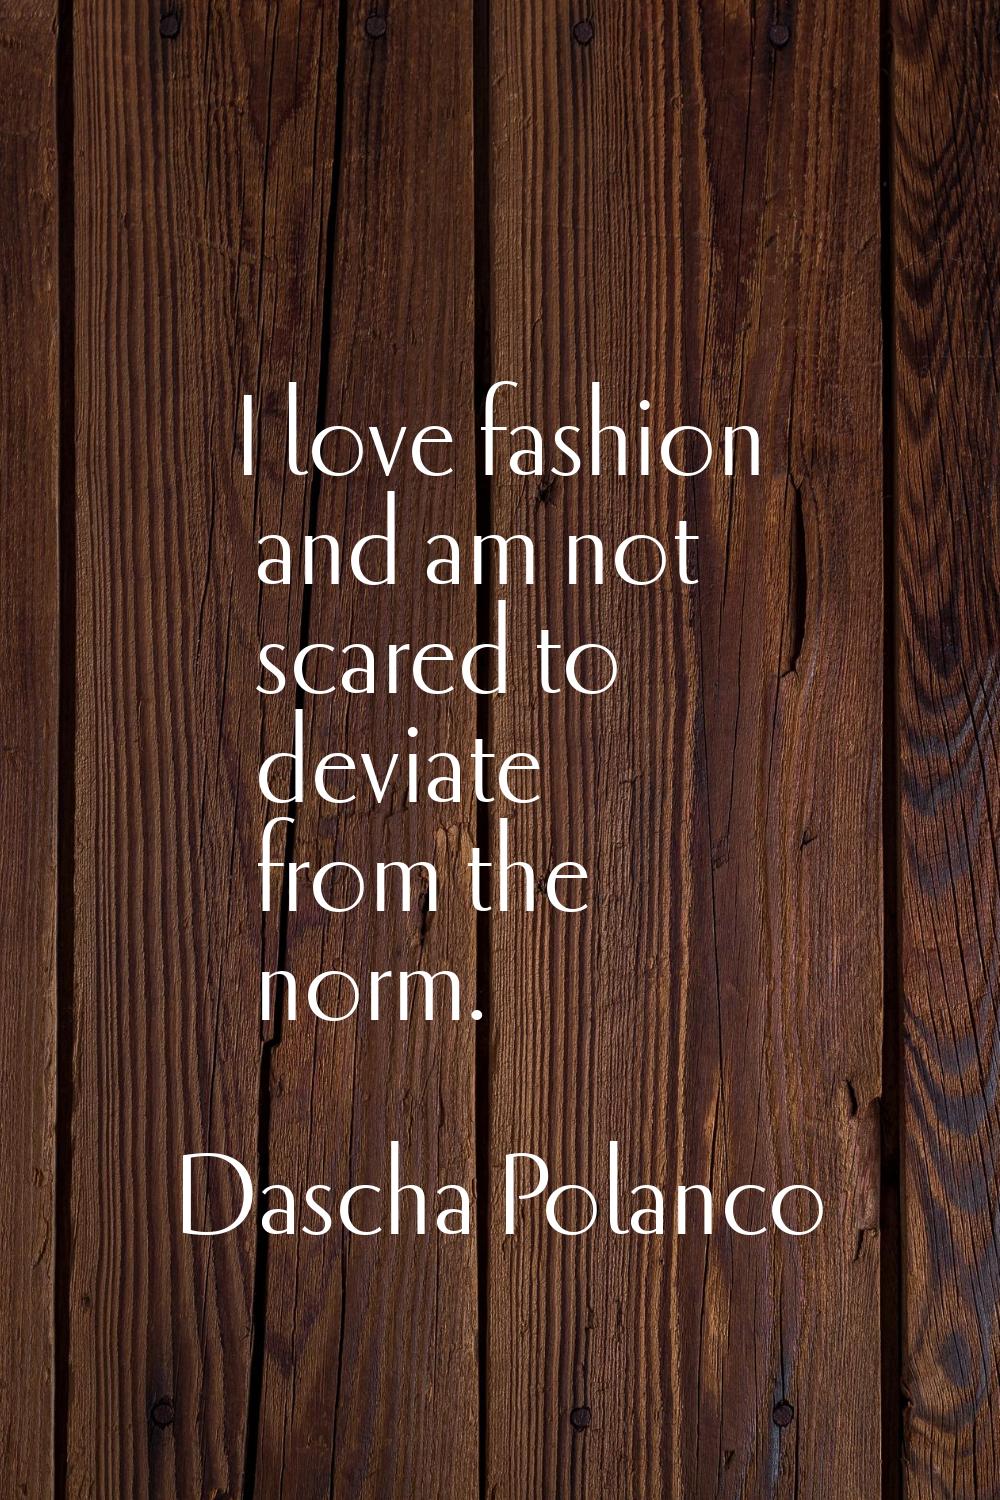 I love fashion and am not scared to deviate from the norm.